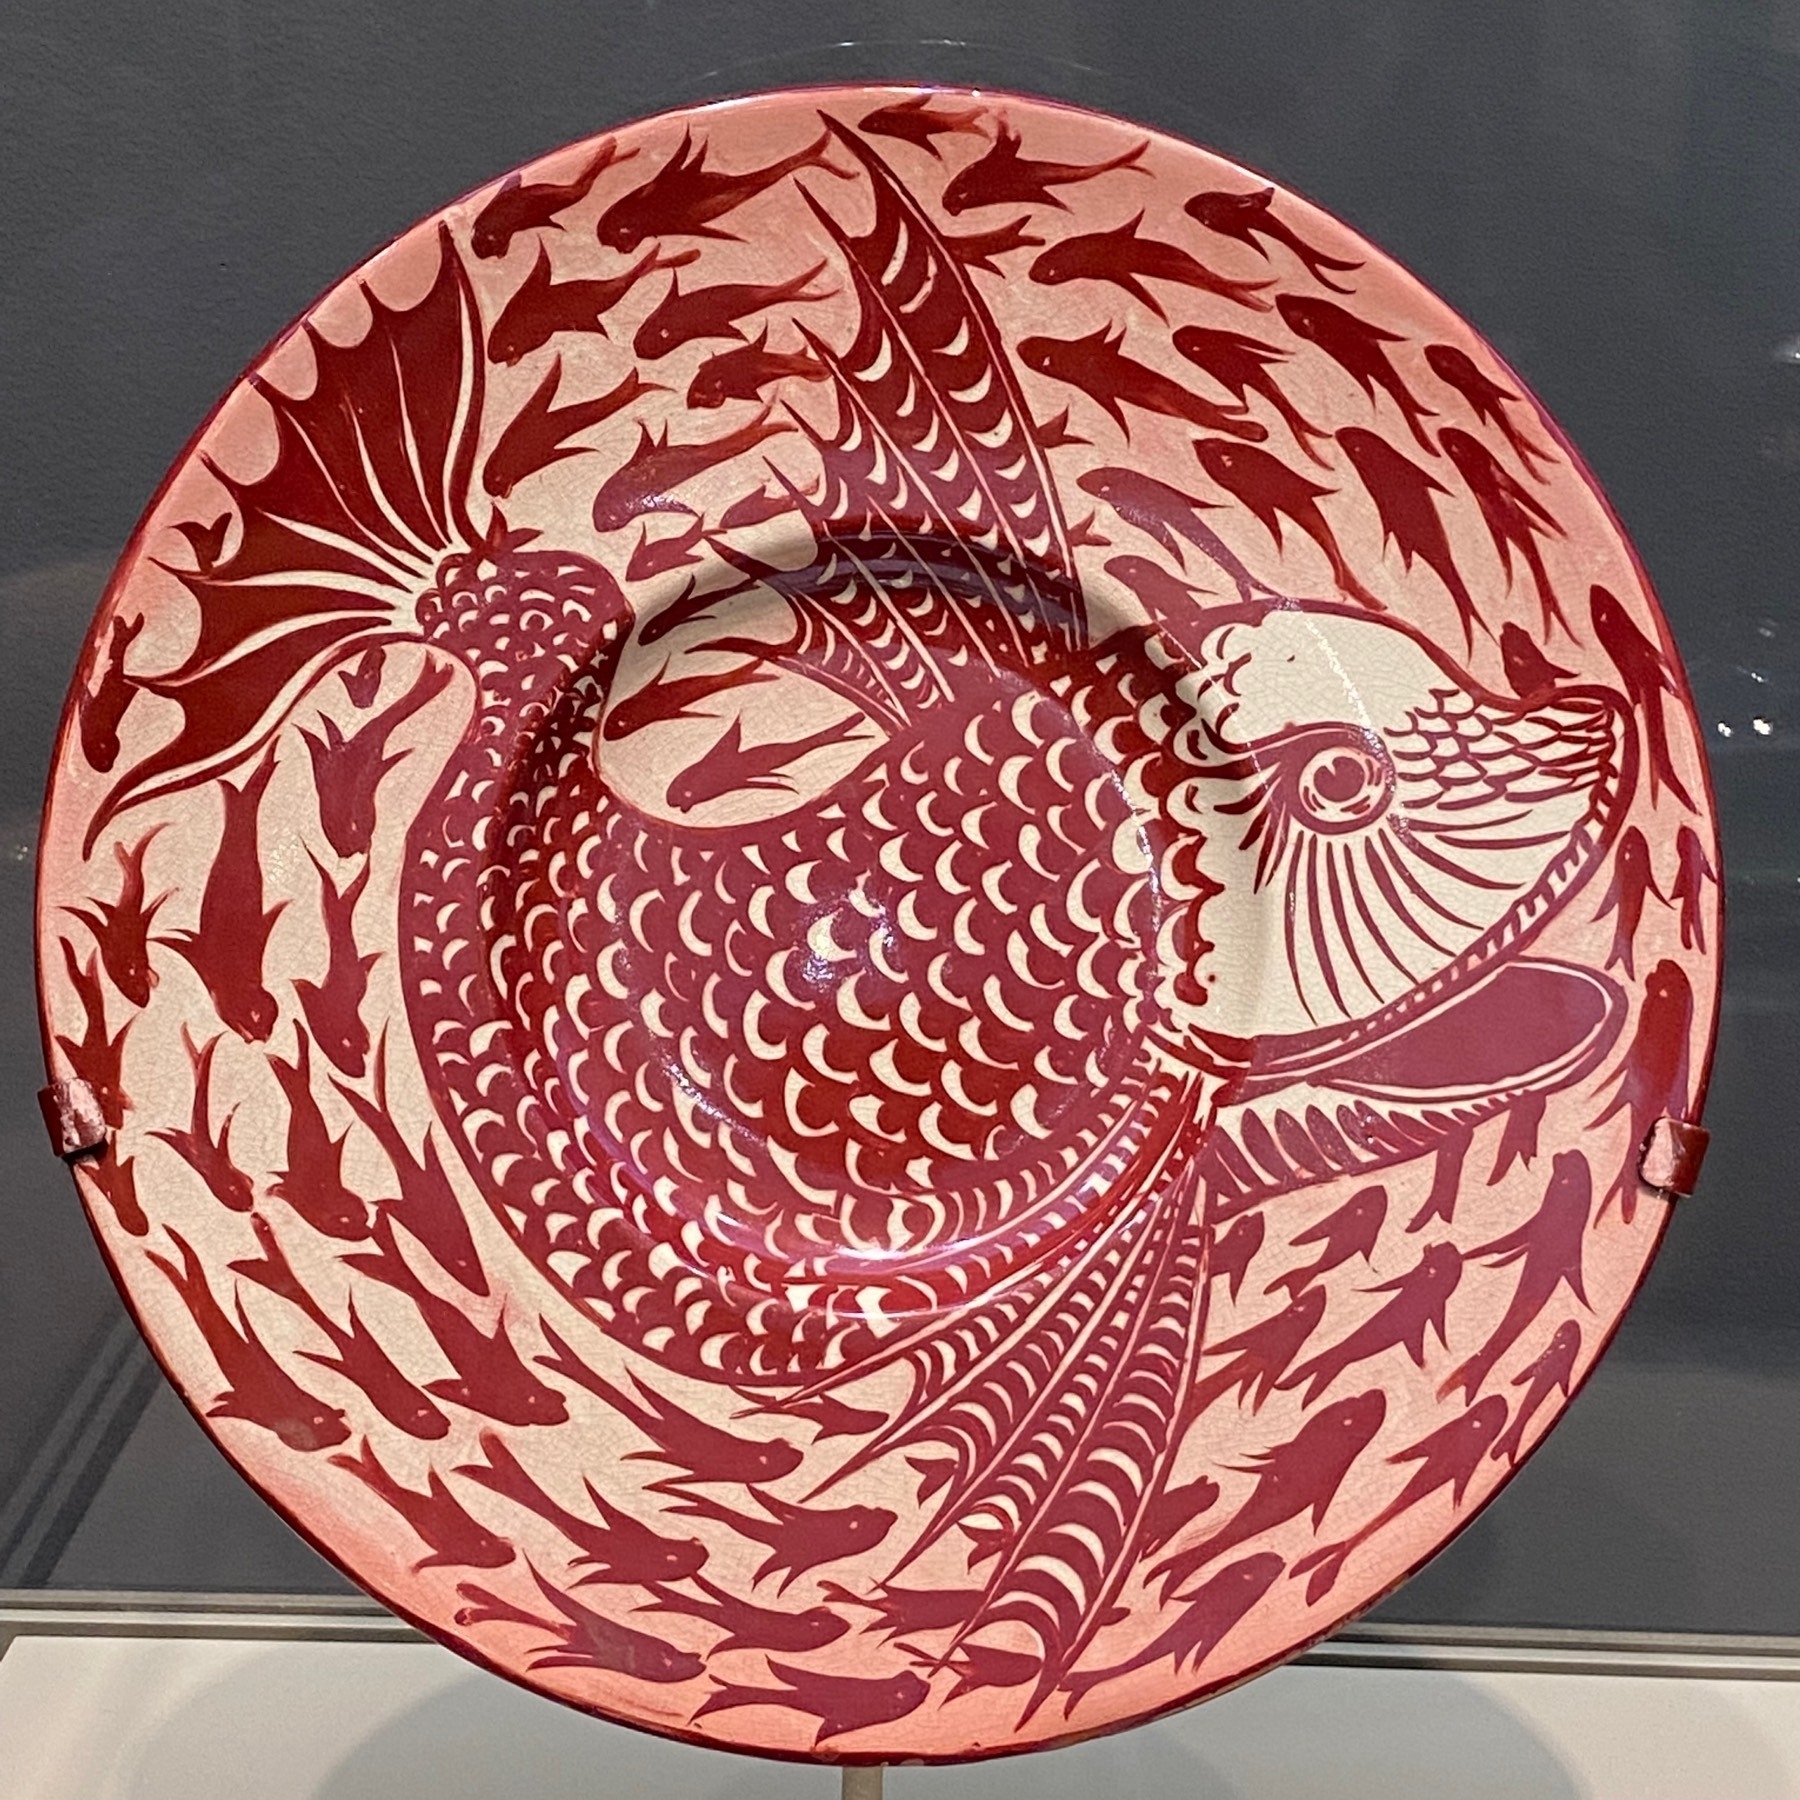 Large pinkish platter with a large fish in the center, surrounded by the silhouttes of small fish around the edge.